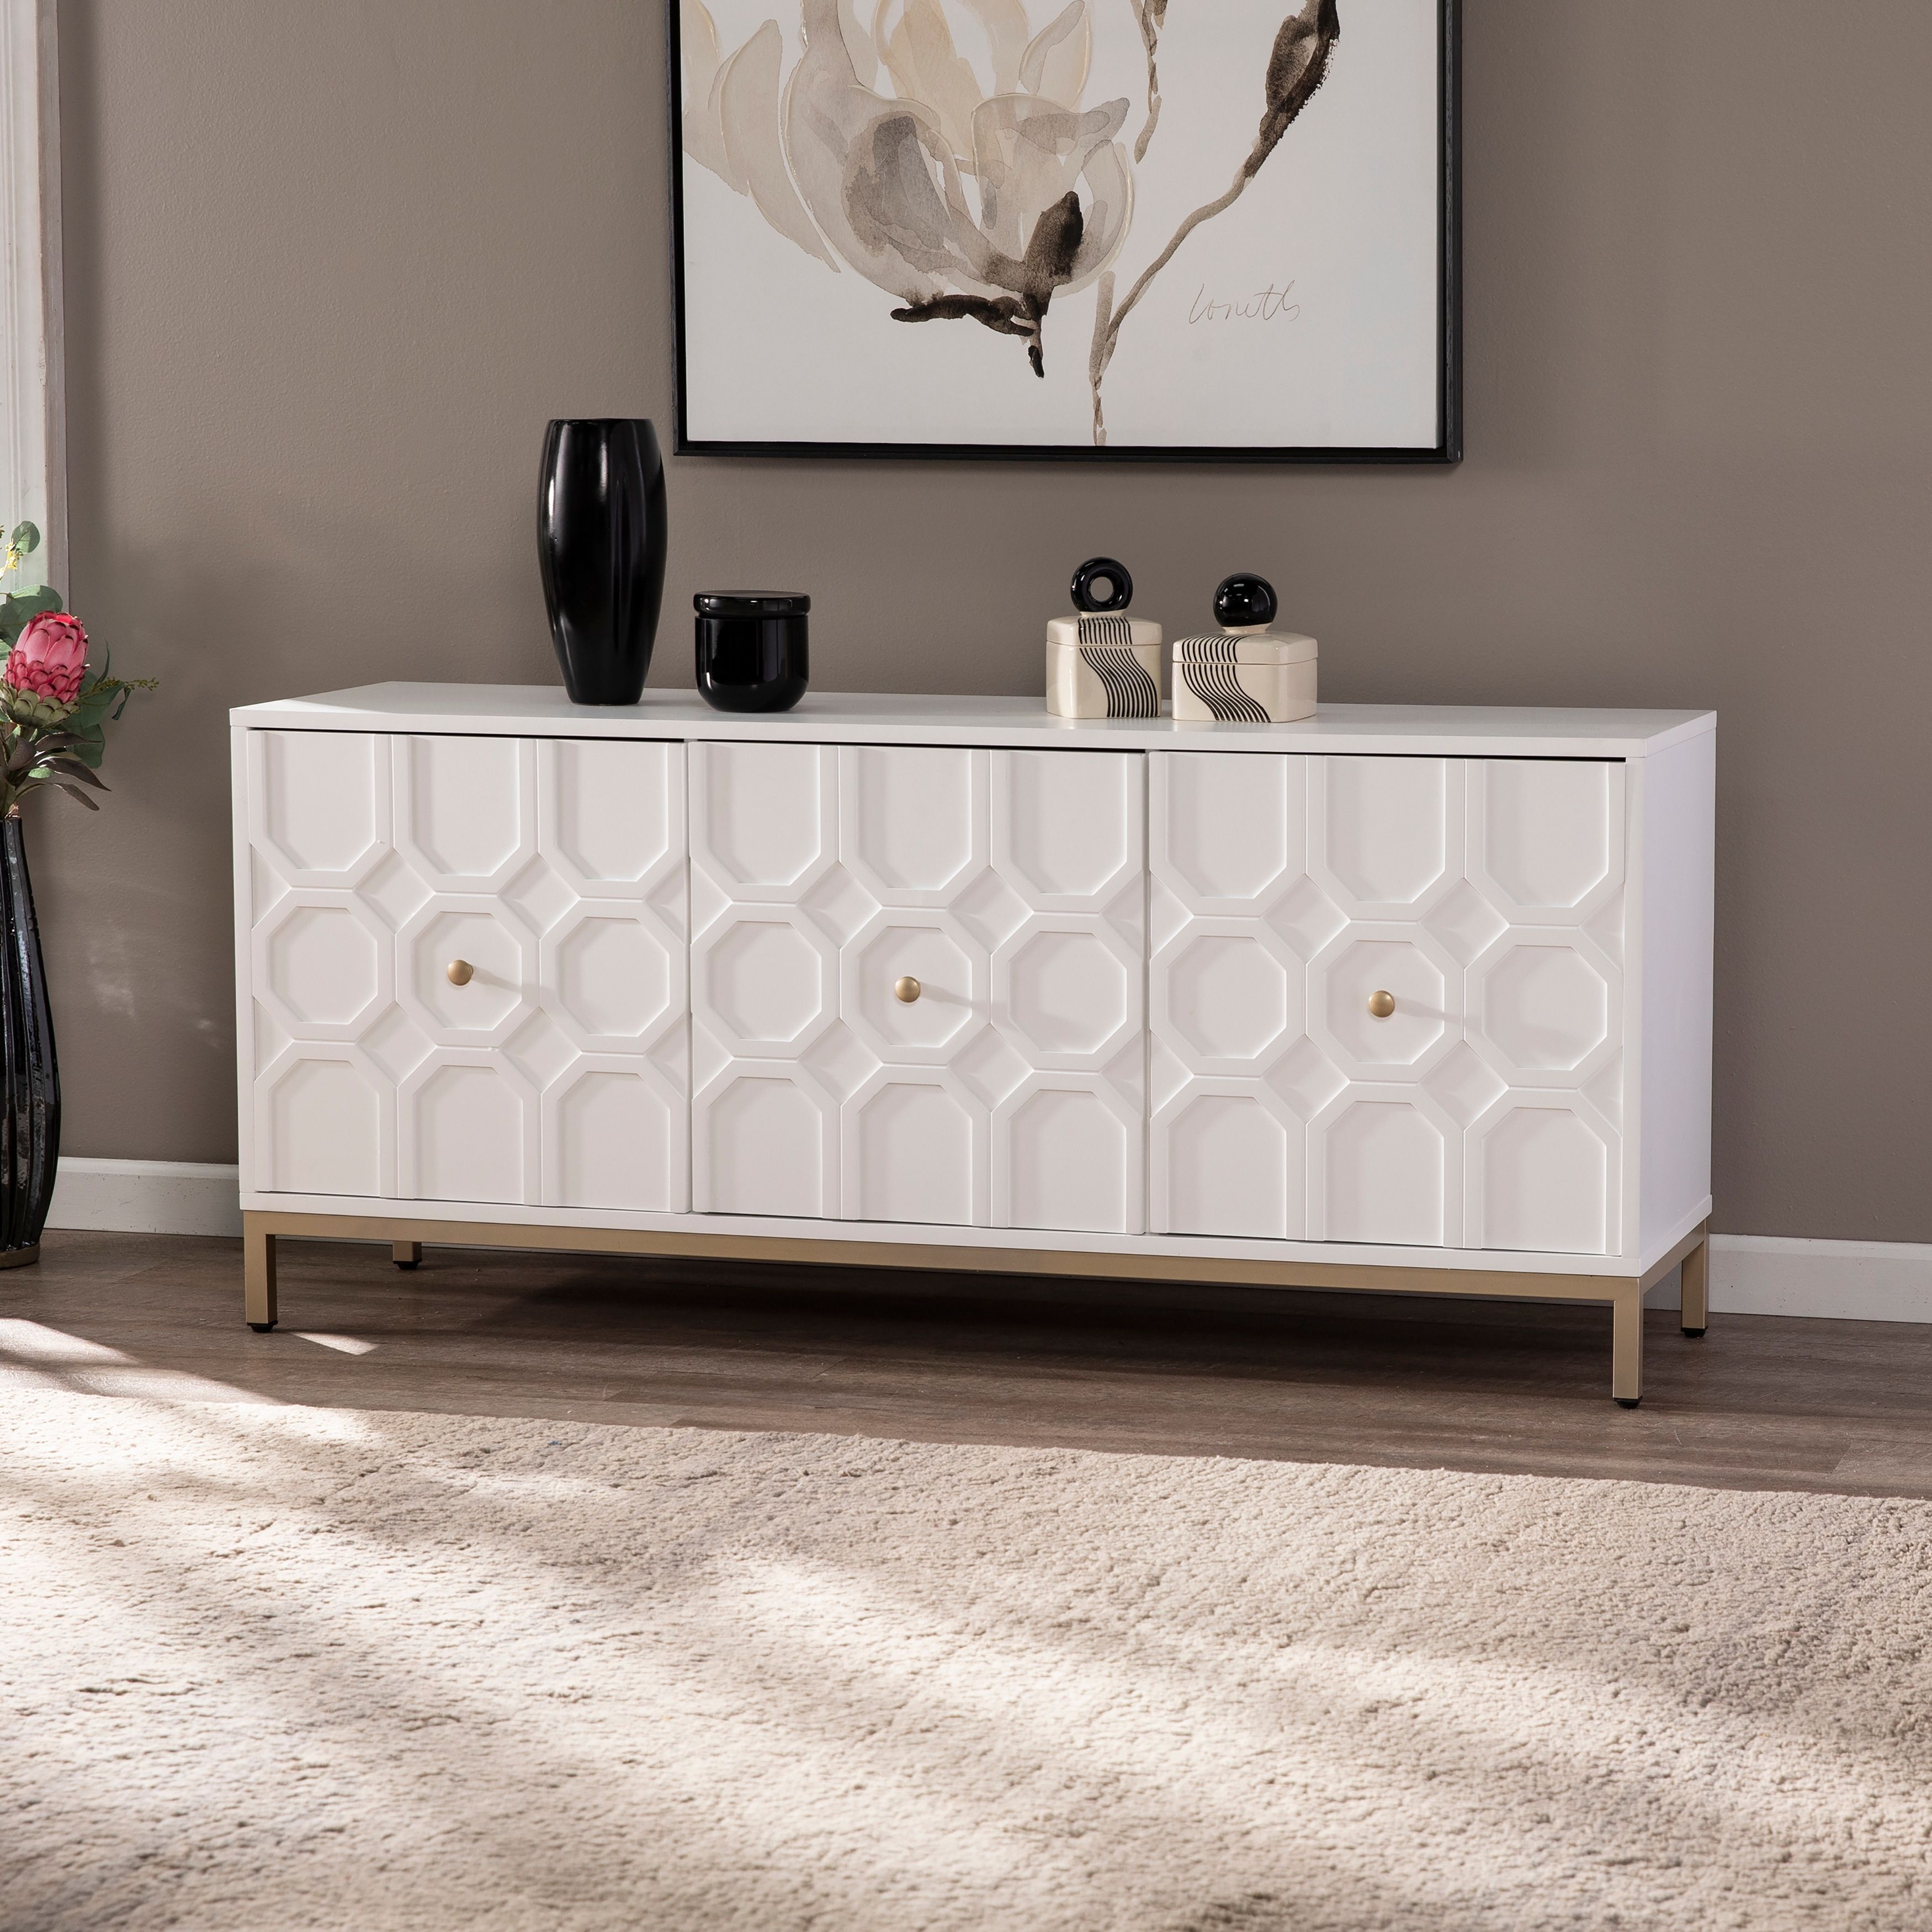 Sei Furniture Gliday Contemporary White Wood 3 Door Buffet Sideboard Accent  Cabinet – On Sale – Bed Bath & Beyond – 30217877 Intended For Latest Sideboards Accent Cabinet (View 2 of 15)